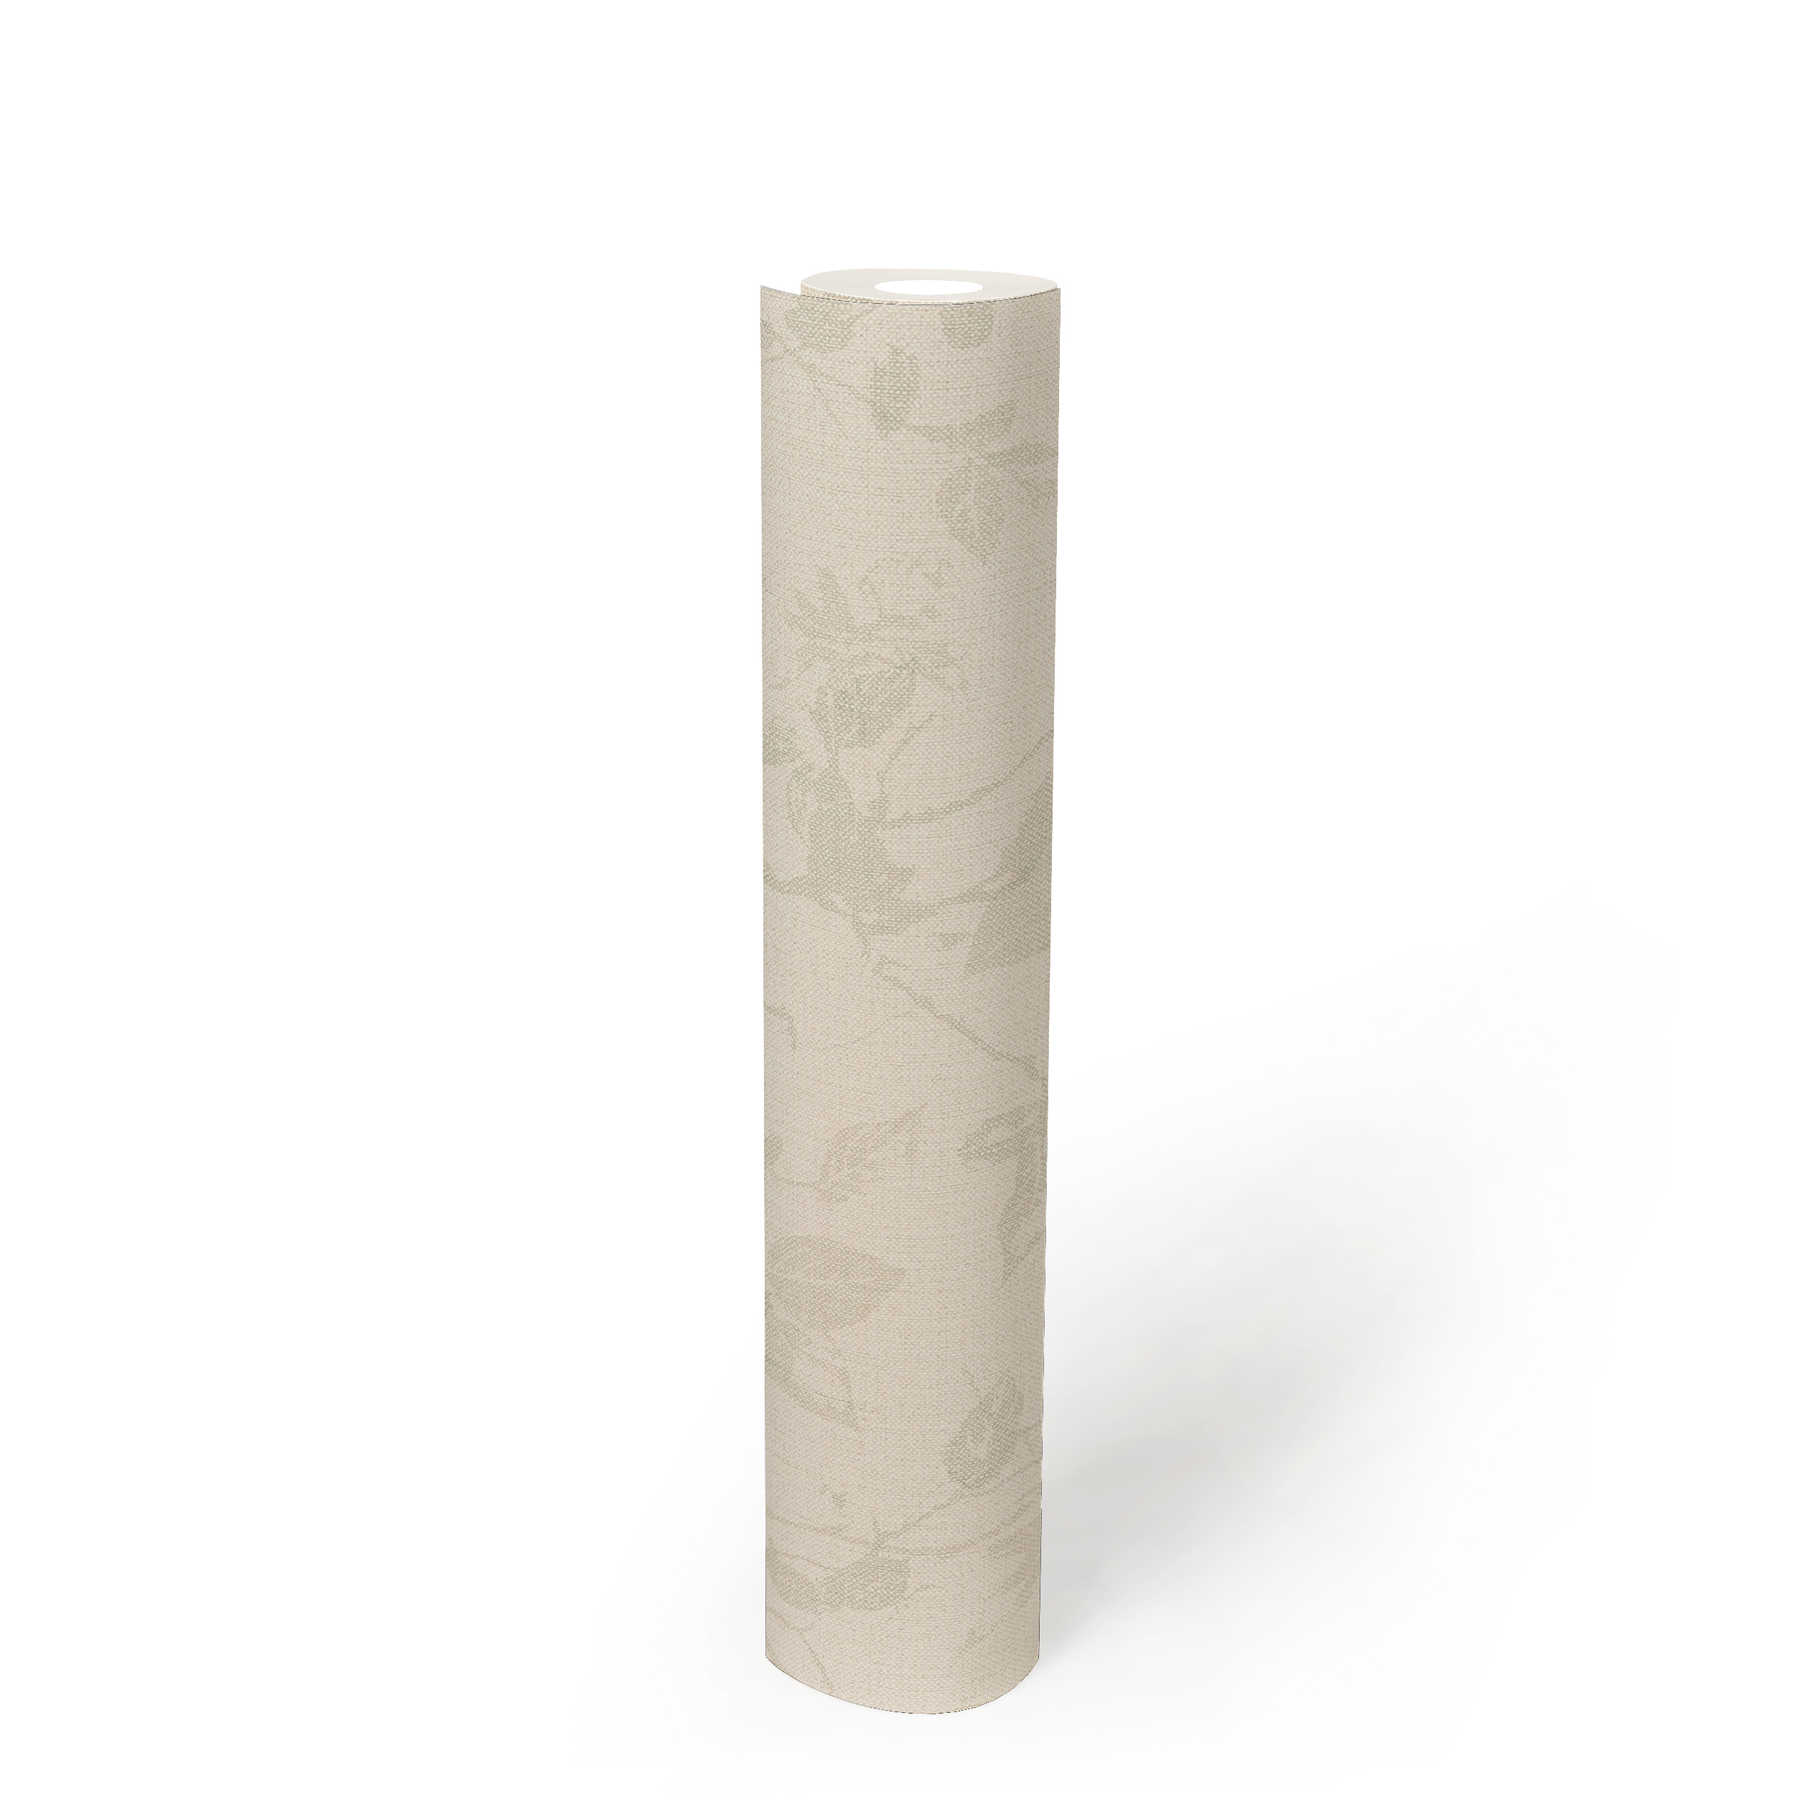             Linen optics wallpaper with leaves motif in country style - beige
        